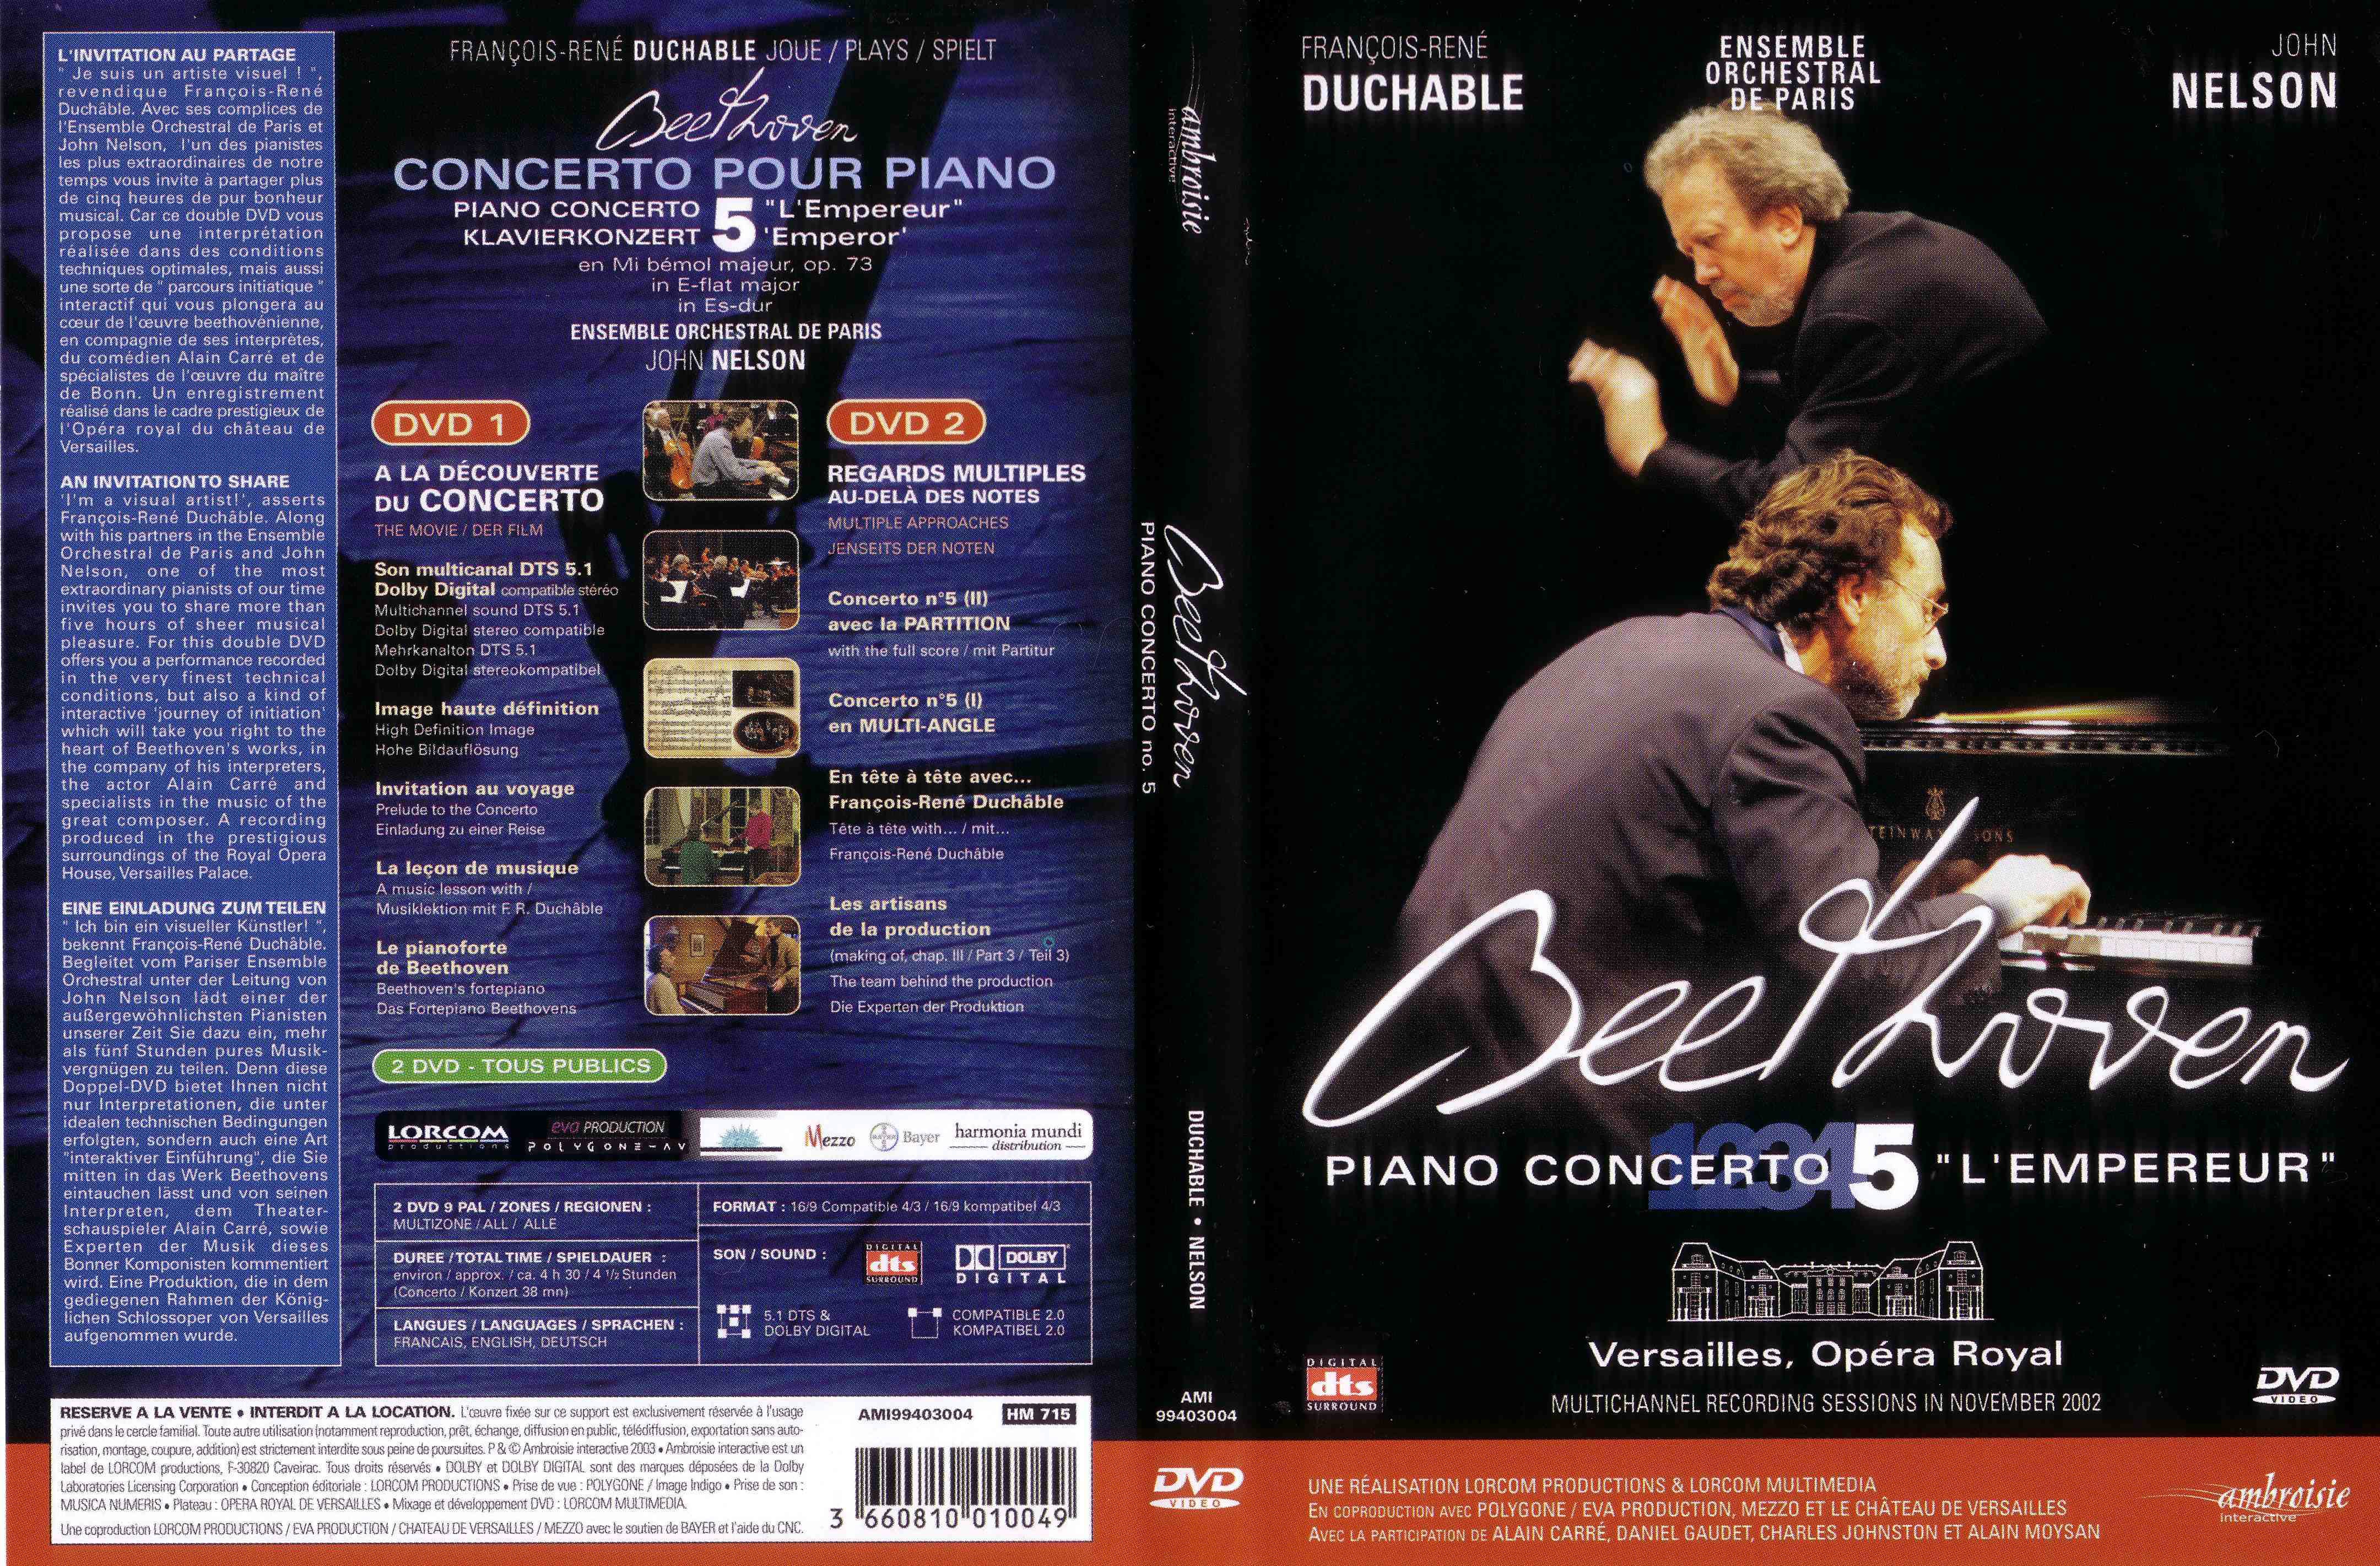 Jaquette DVD Beethoven concerto